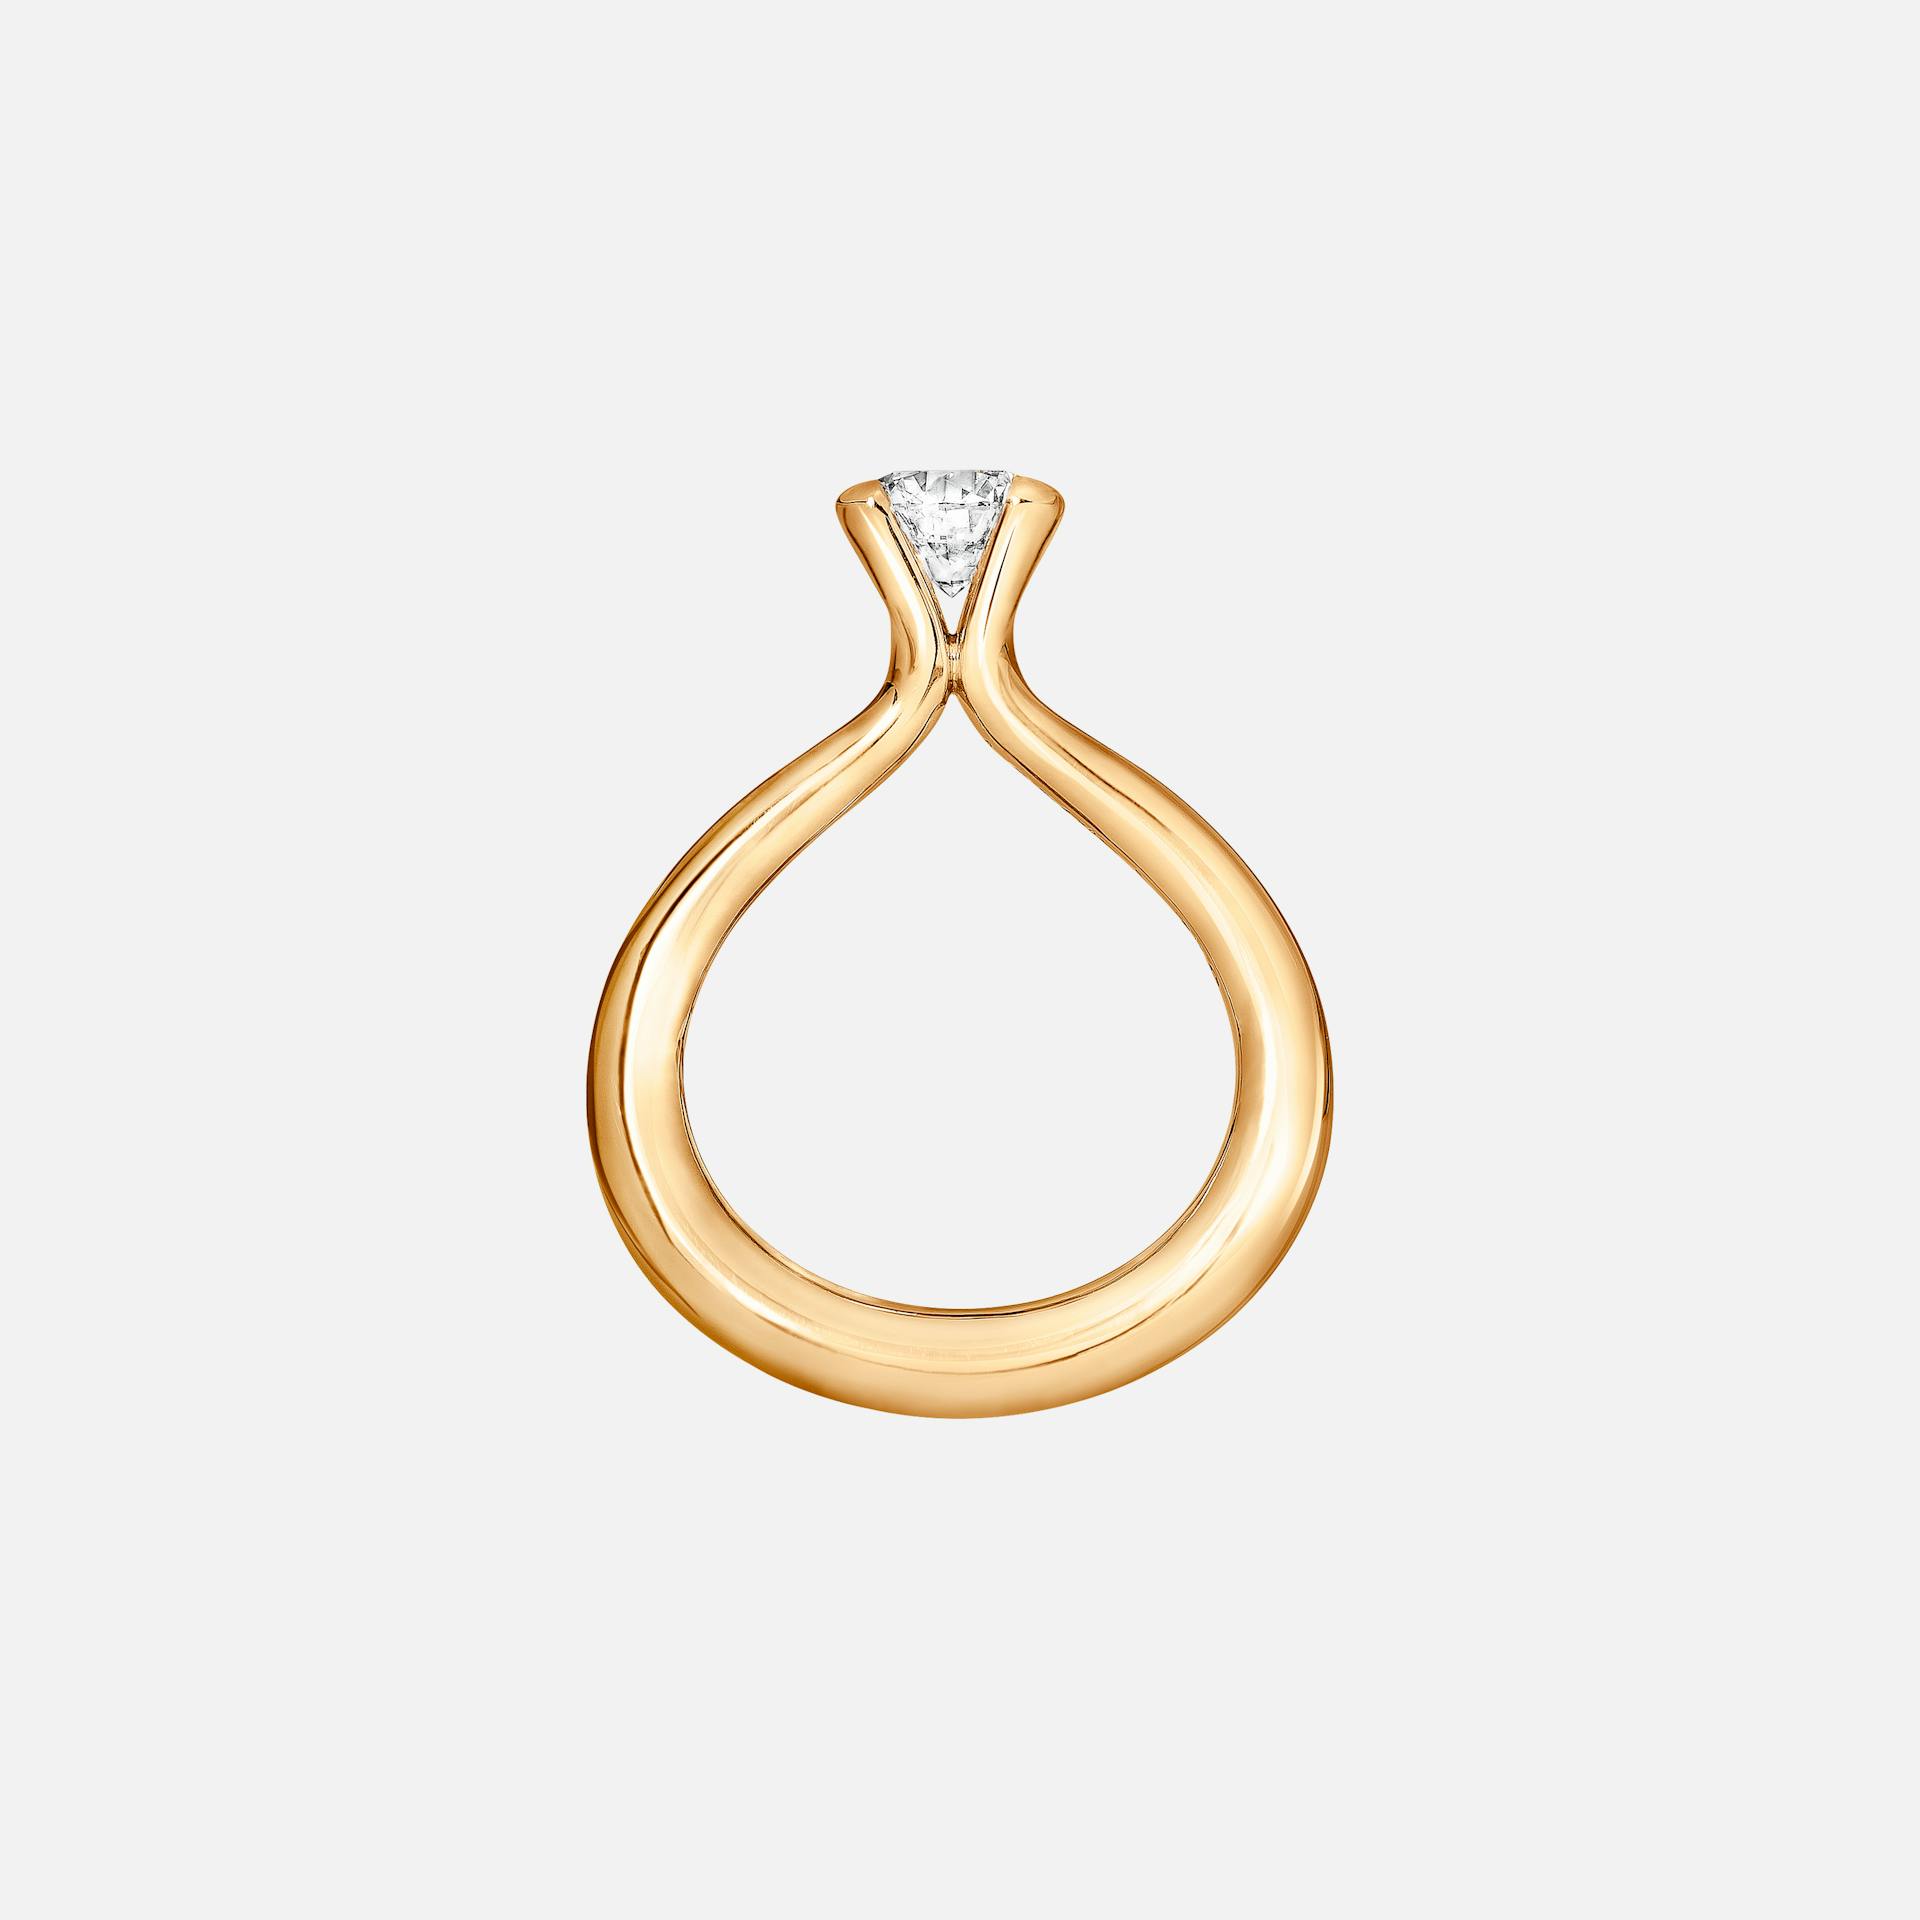 Solitaire necklace 18k gold set with a brilliant-cut diamond from 1.00 ct. TW. VS.

